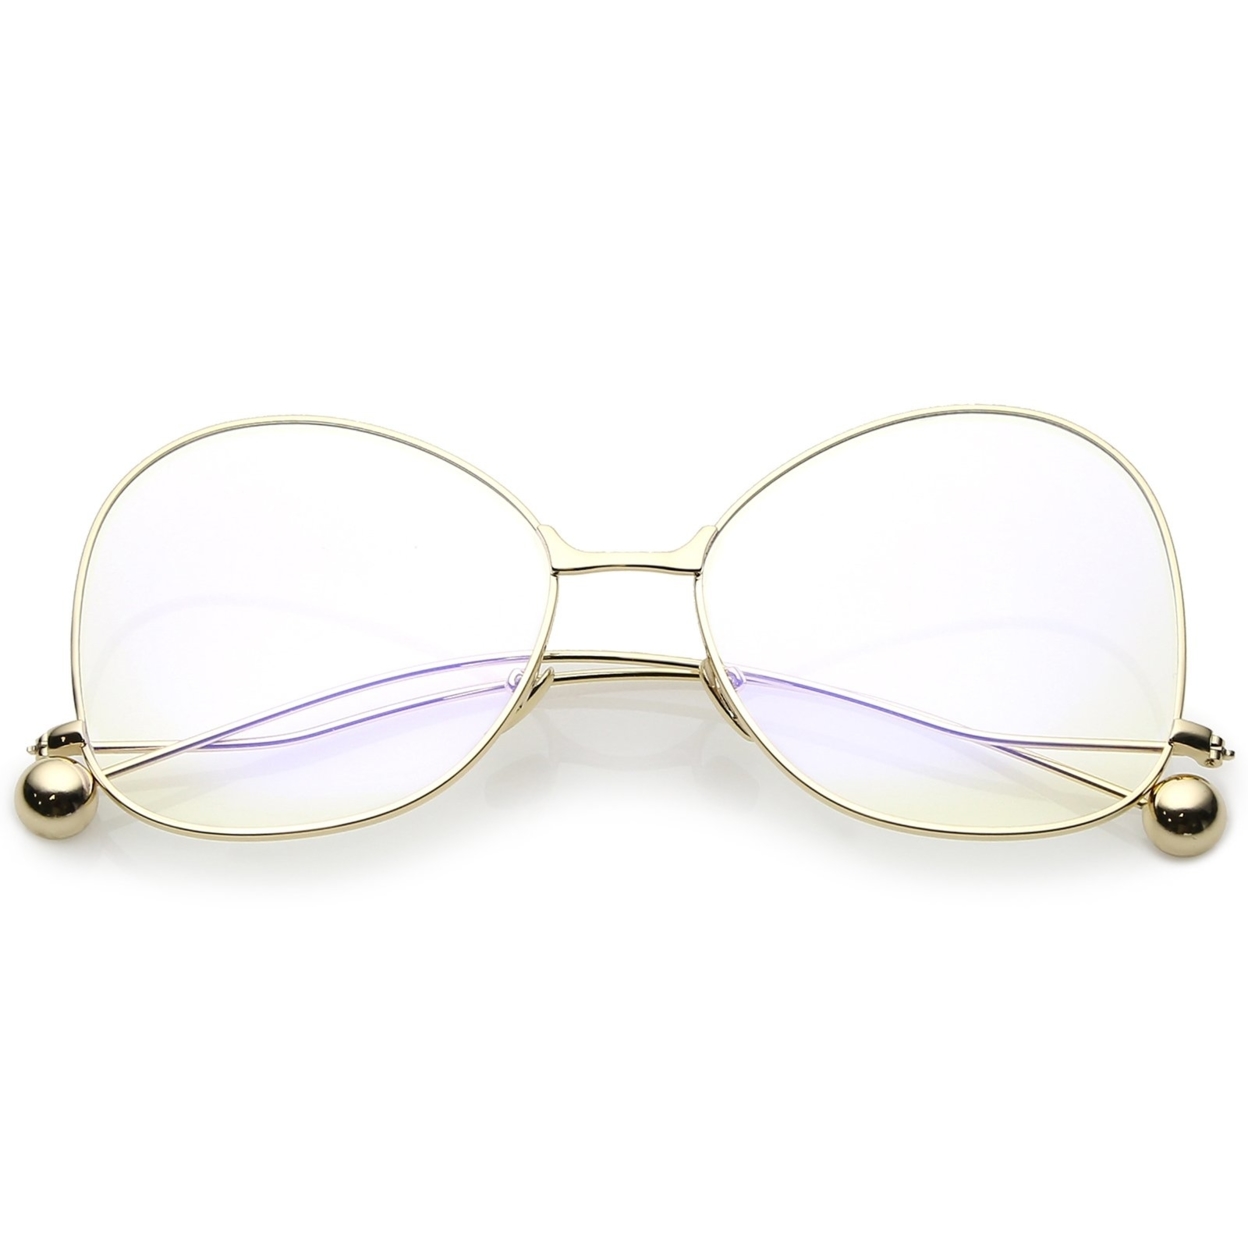 Oversize Butterfly Glasses With Clear Lenses And Thin Metal Arms With Ball Accents - Gold / Clear